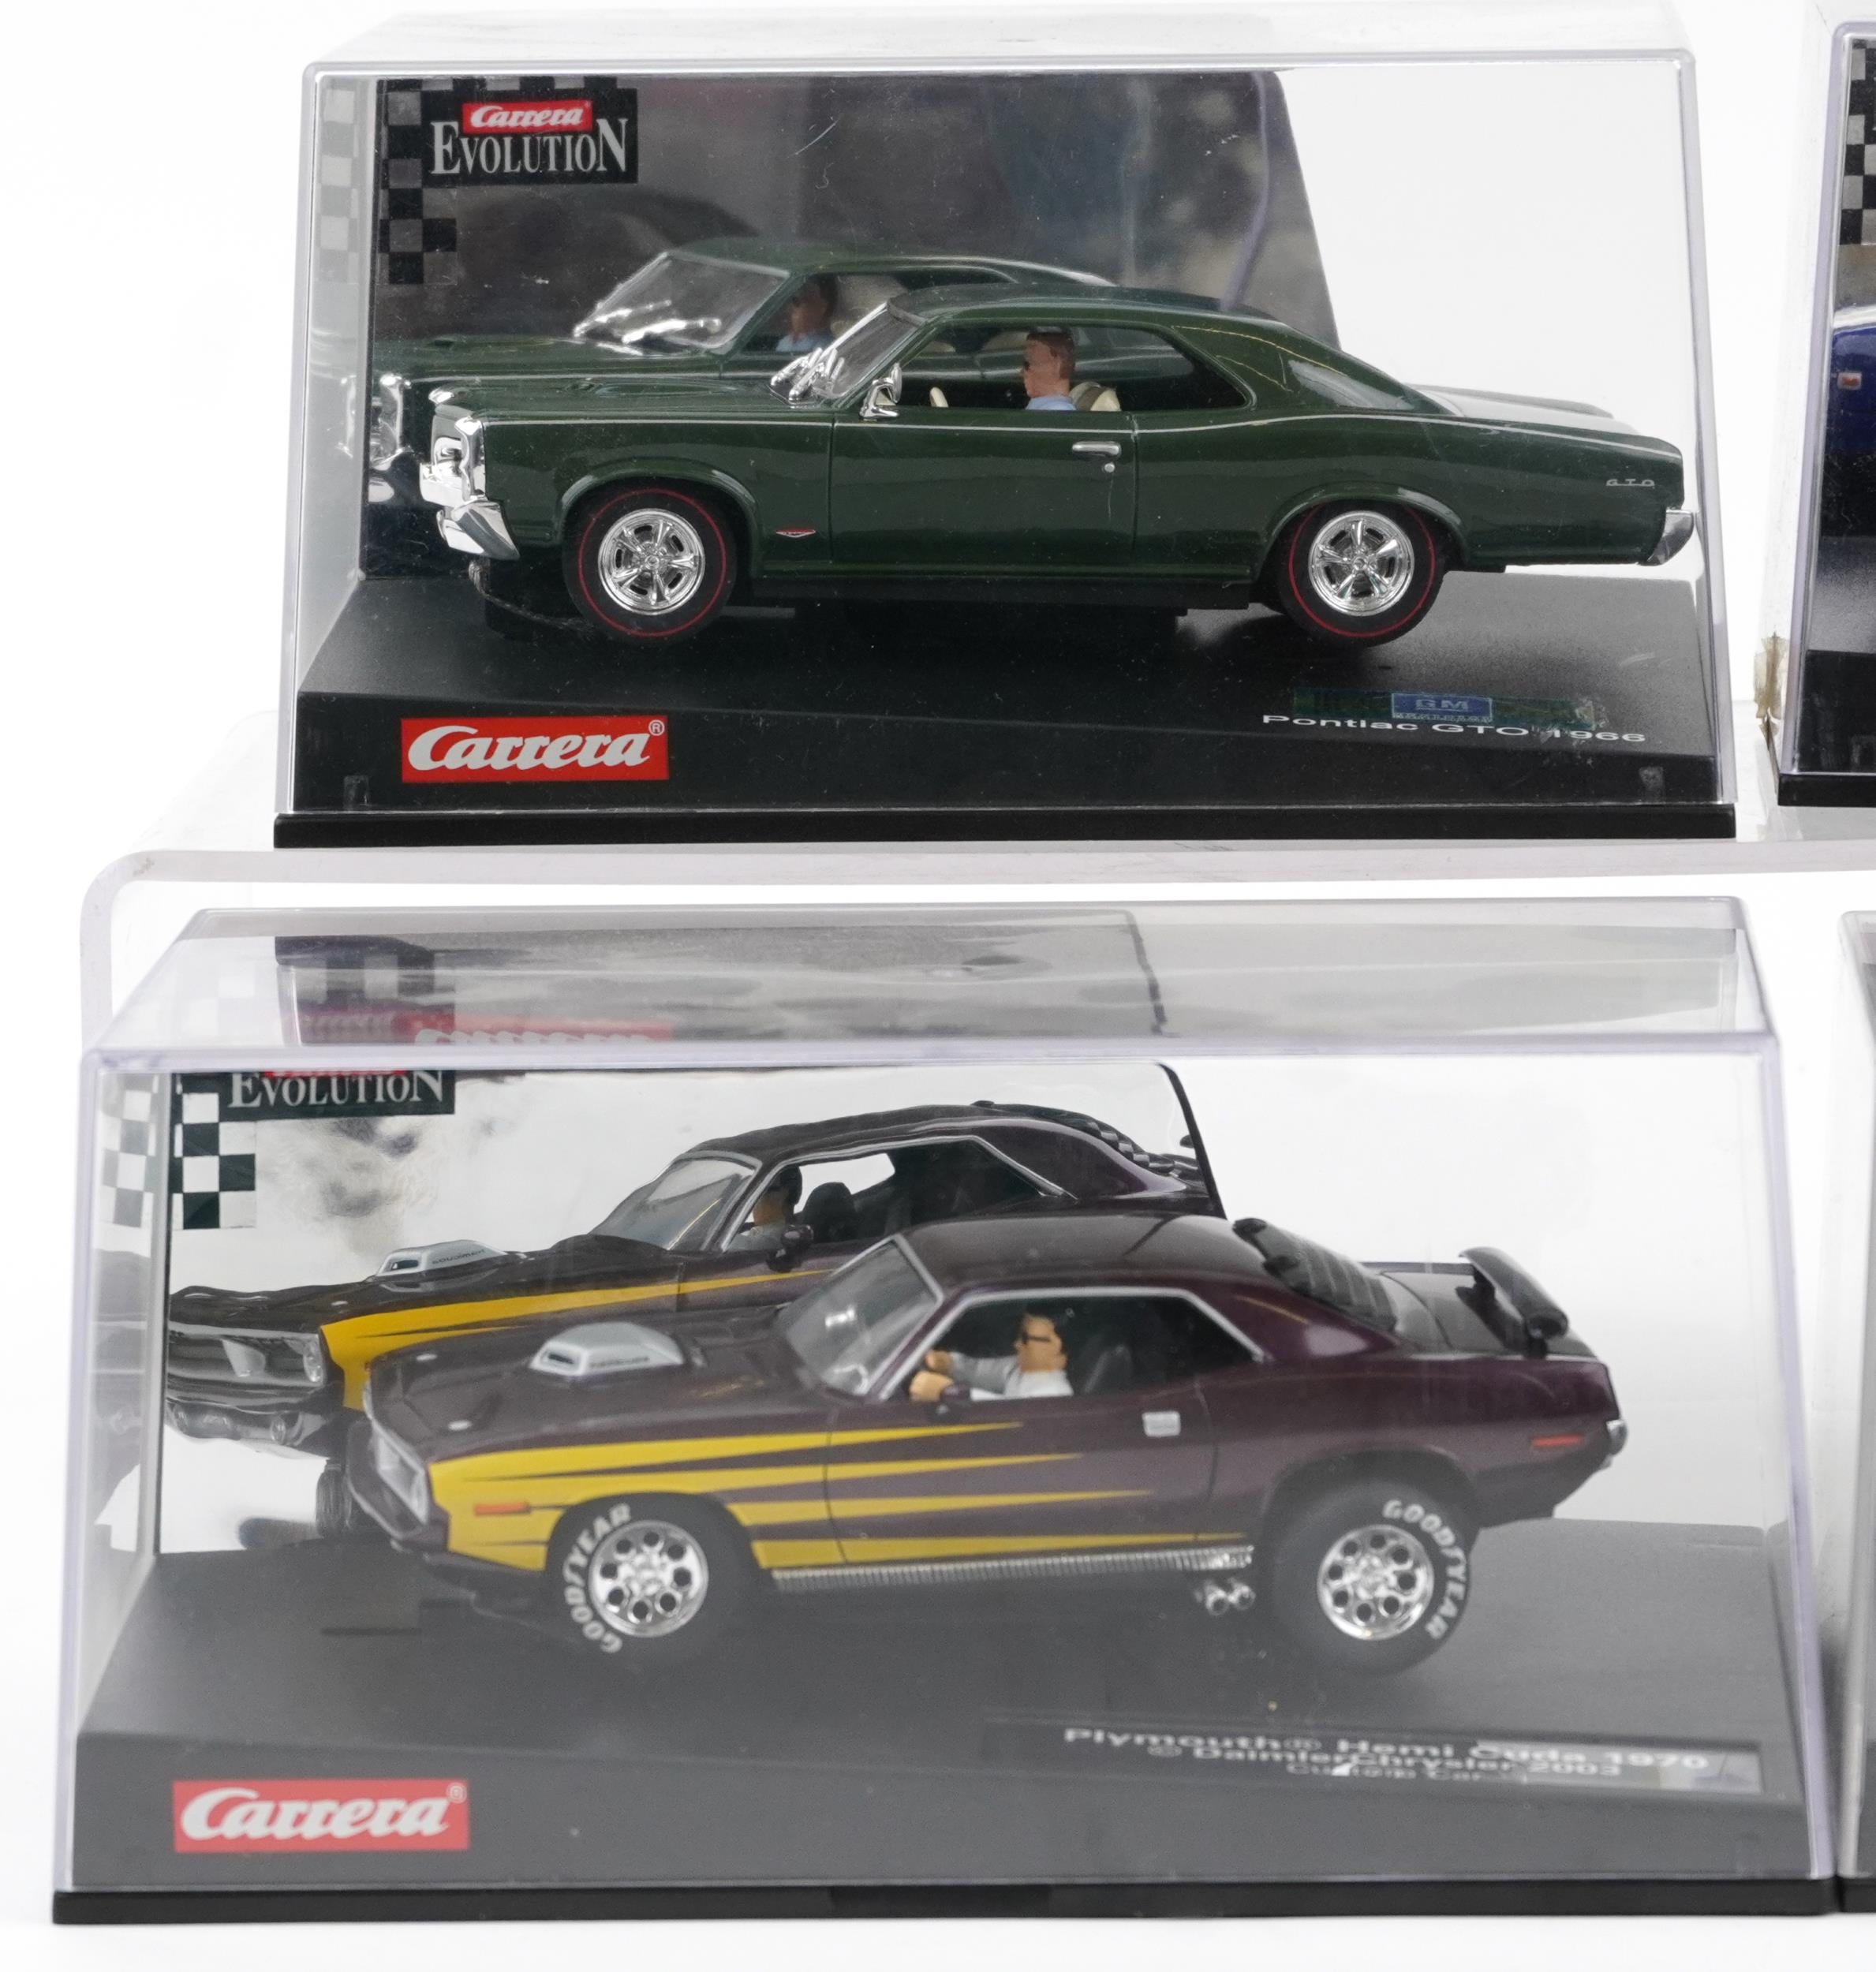 Six Carrera Evolution slot cars with cases comprising Dodge Charger 500, Porsche Carrera GT, - Image 2 of 3